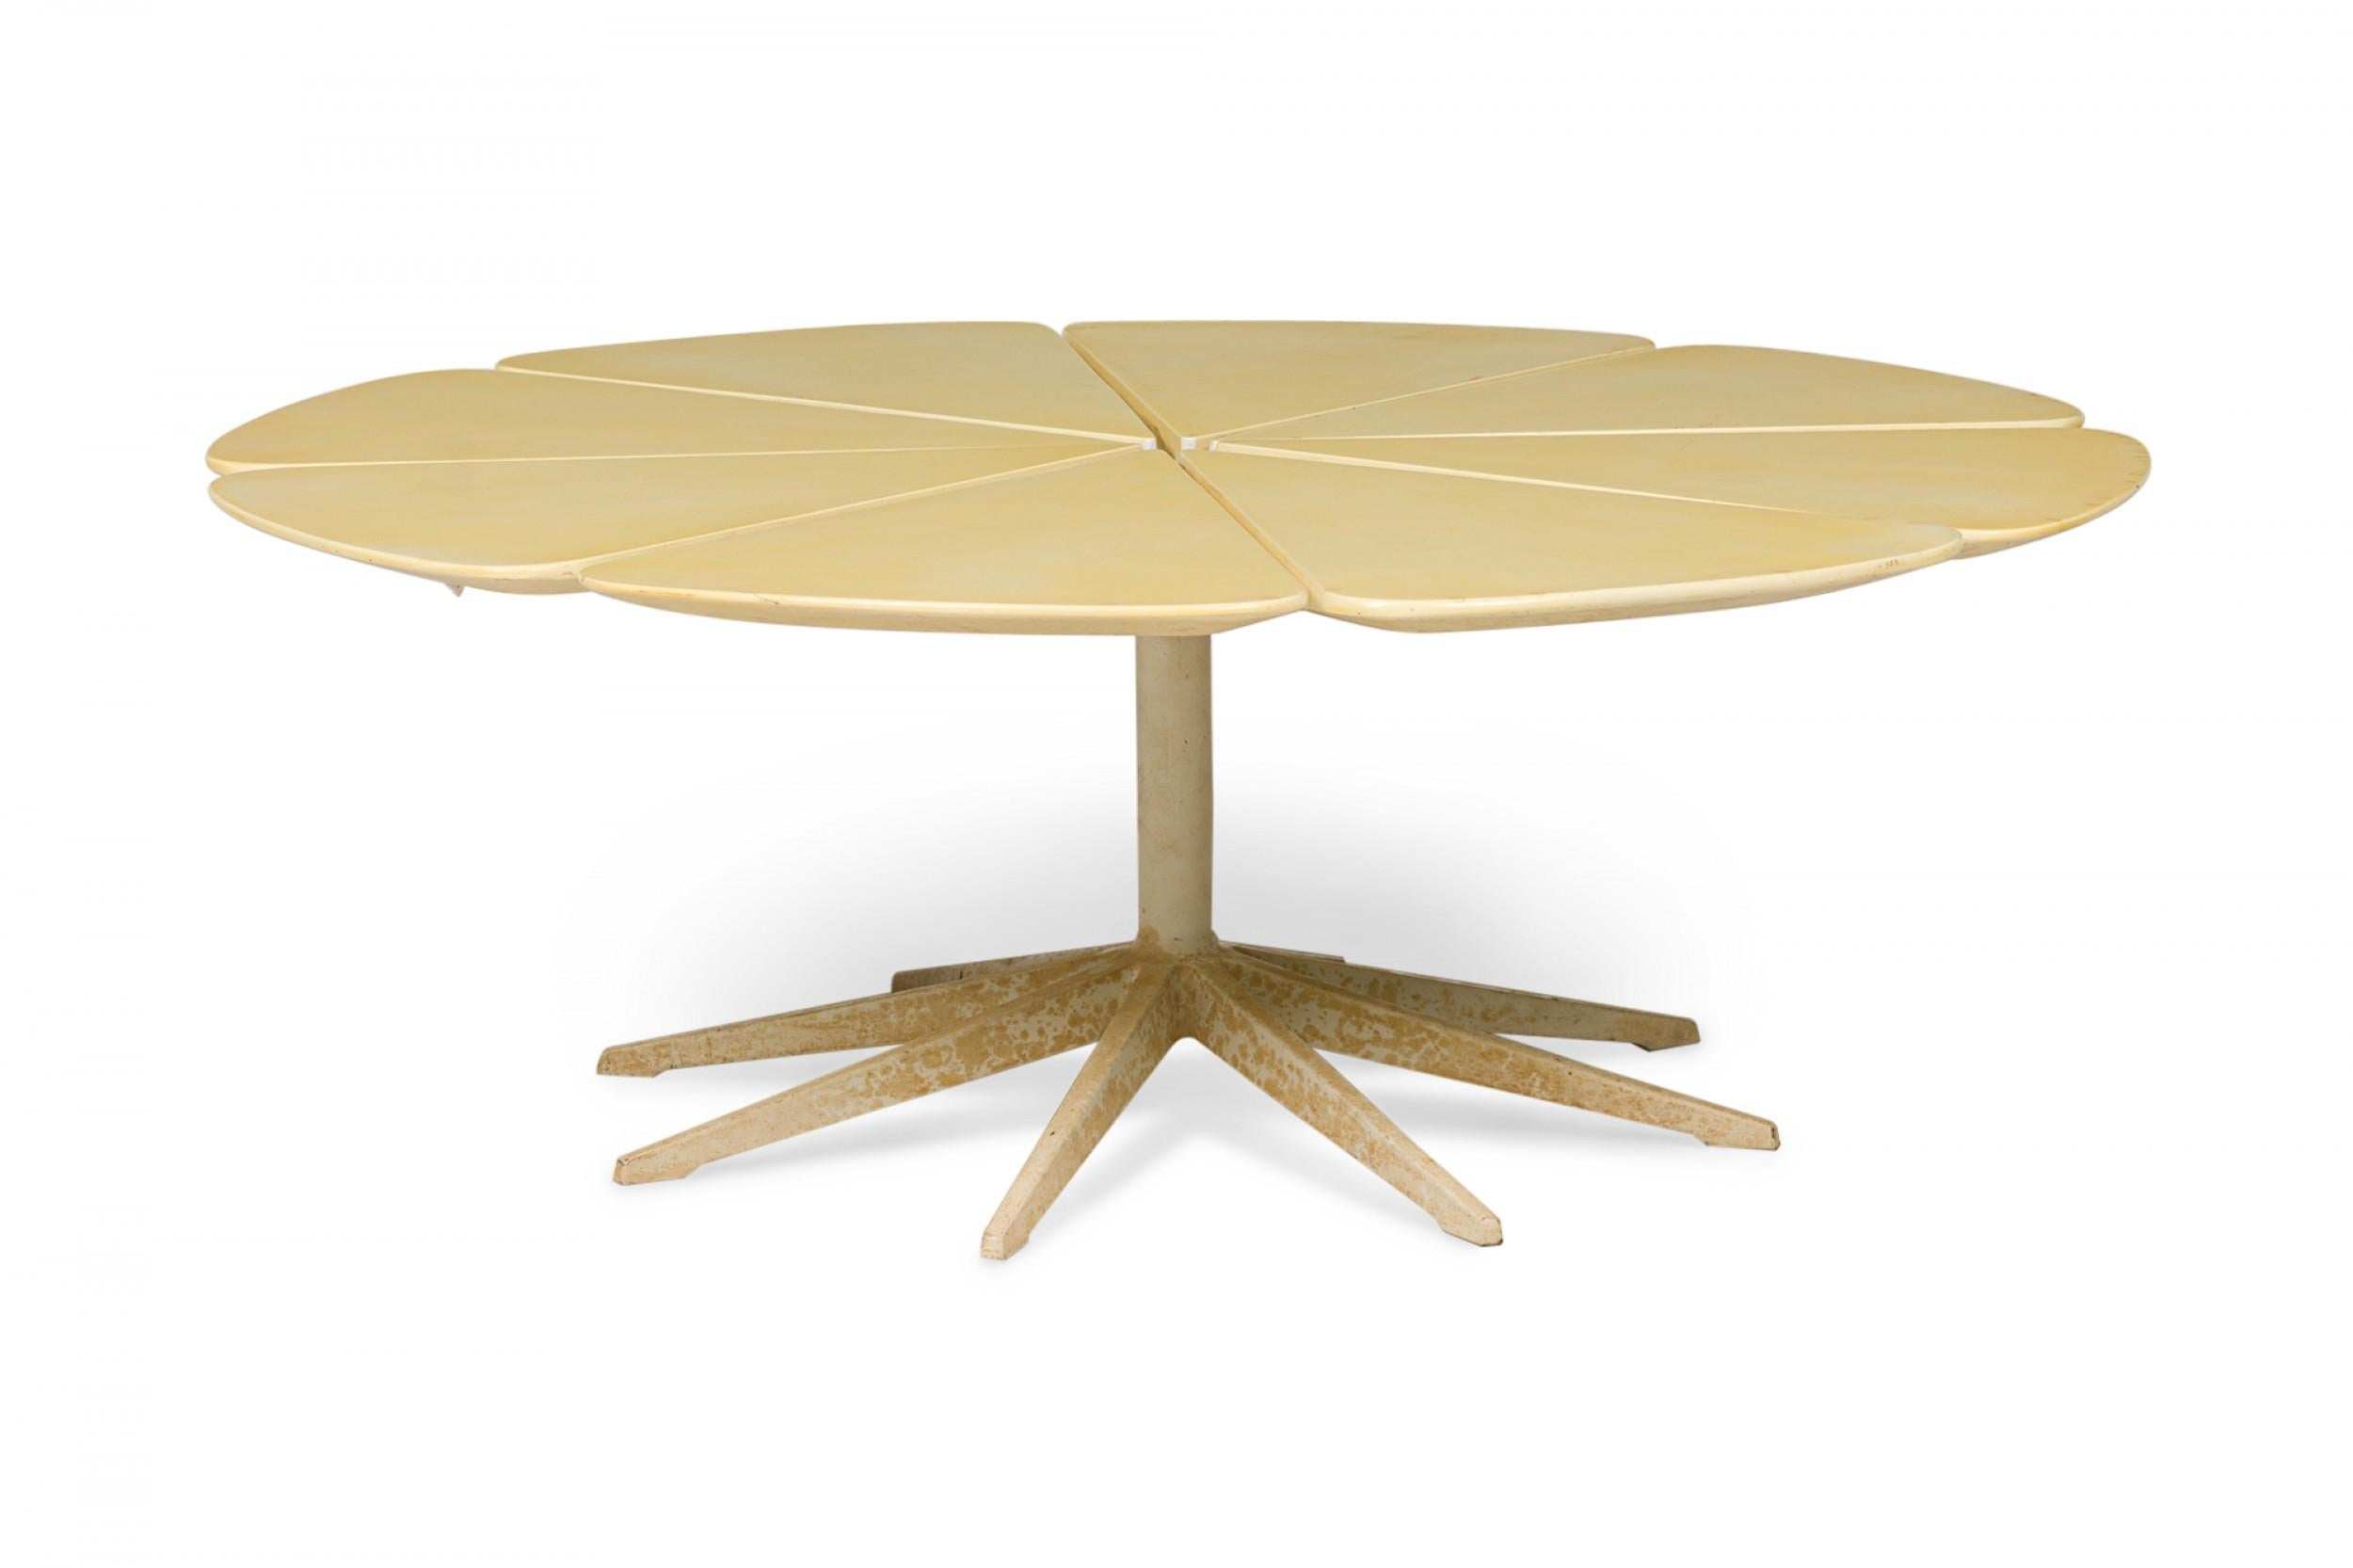 American mid-century 'petal' form coffee / cocktail table made of redwood and finished with beige lacquer, resting on a pedestal base. (Richard Schultz for Knoll International).